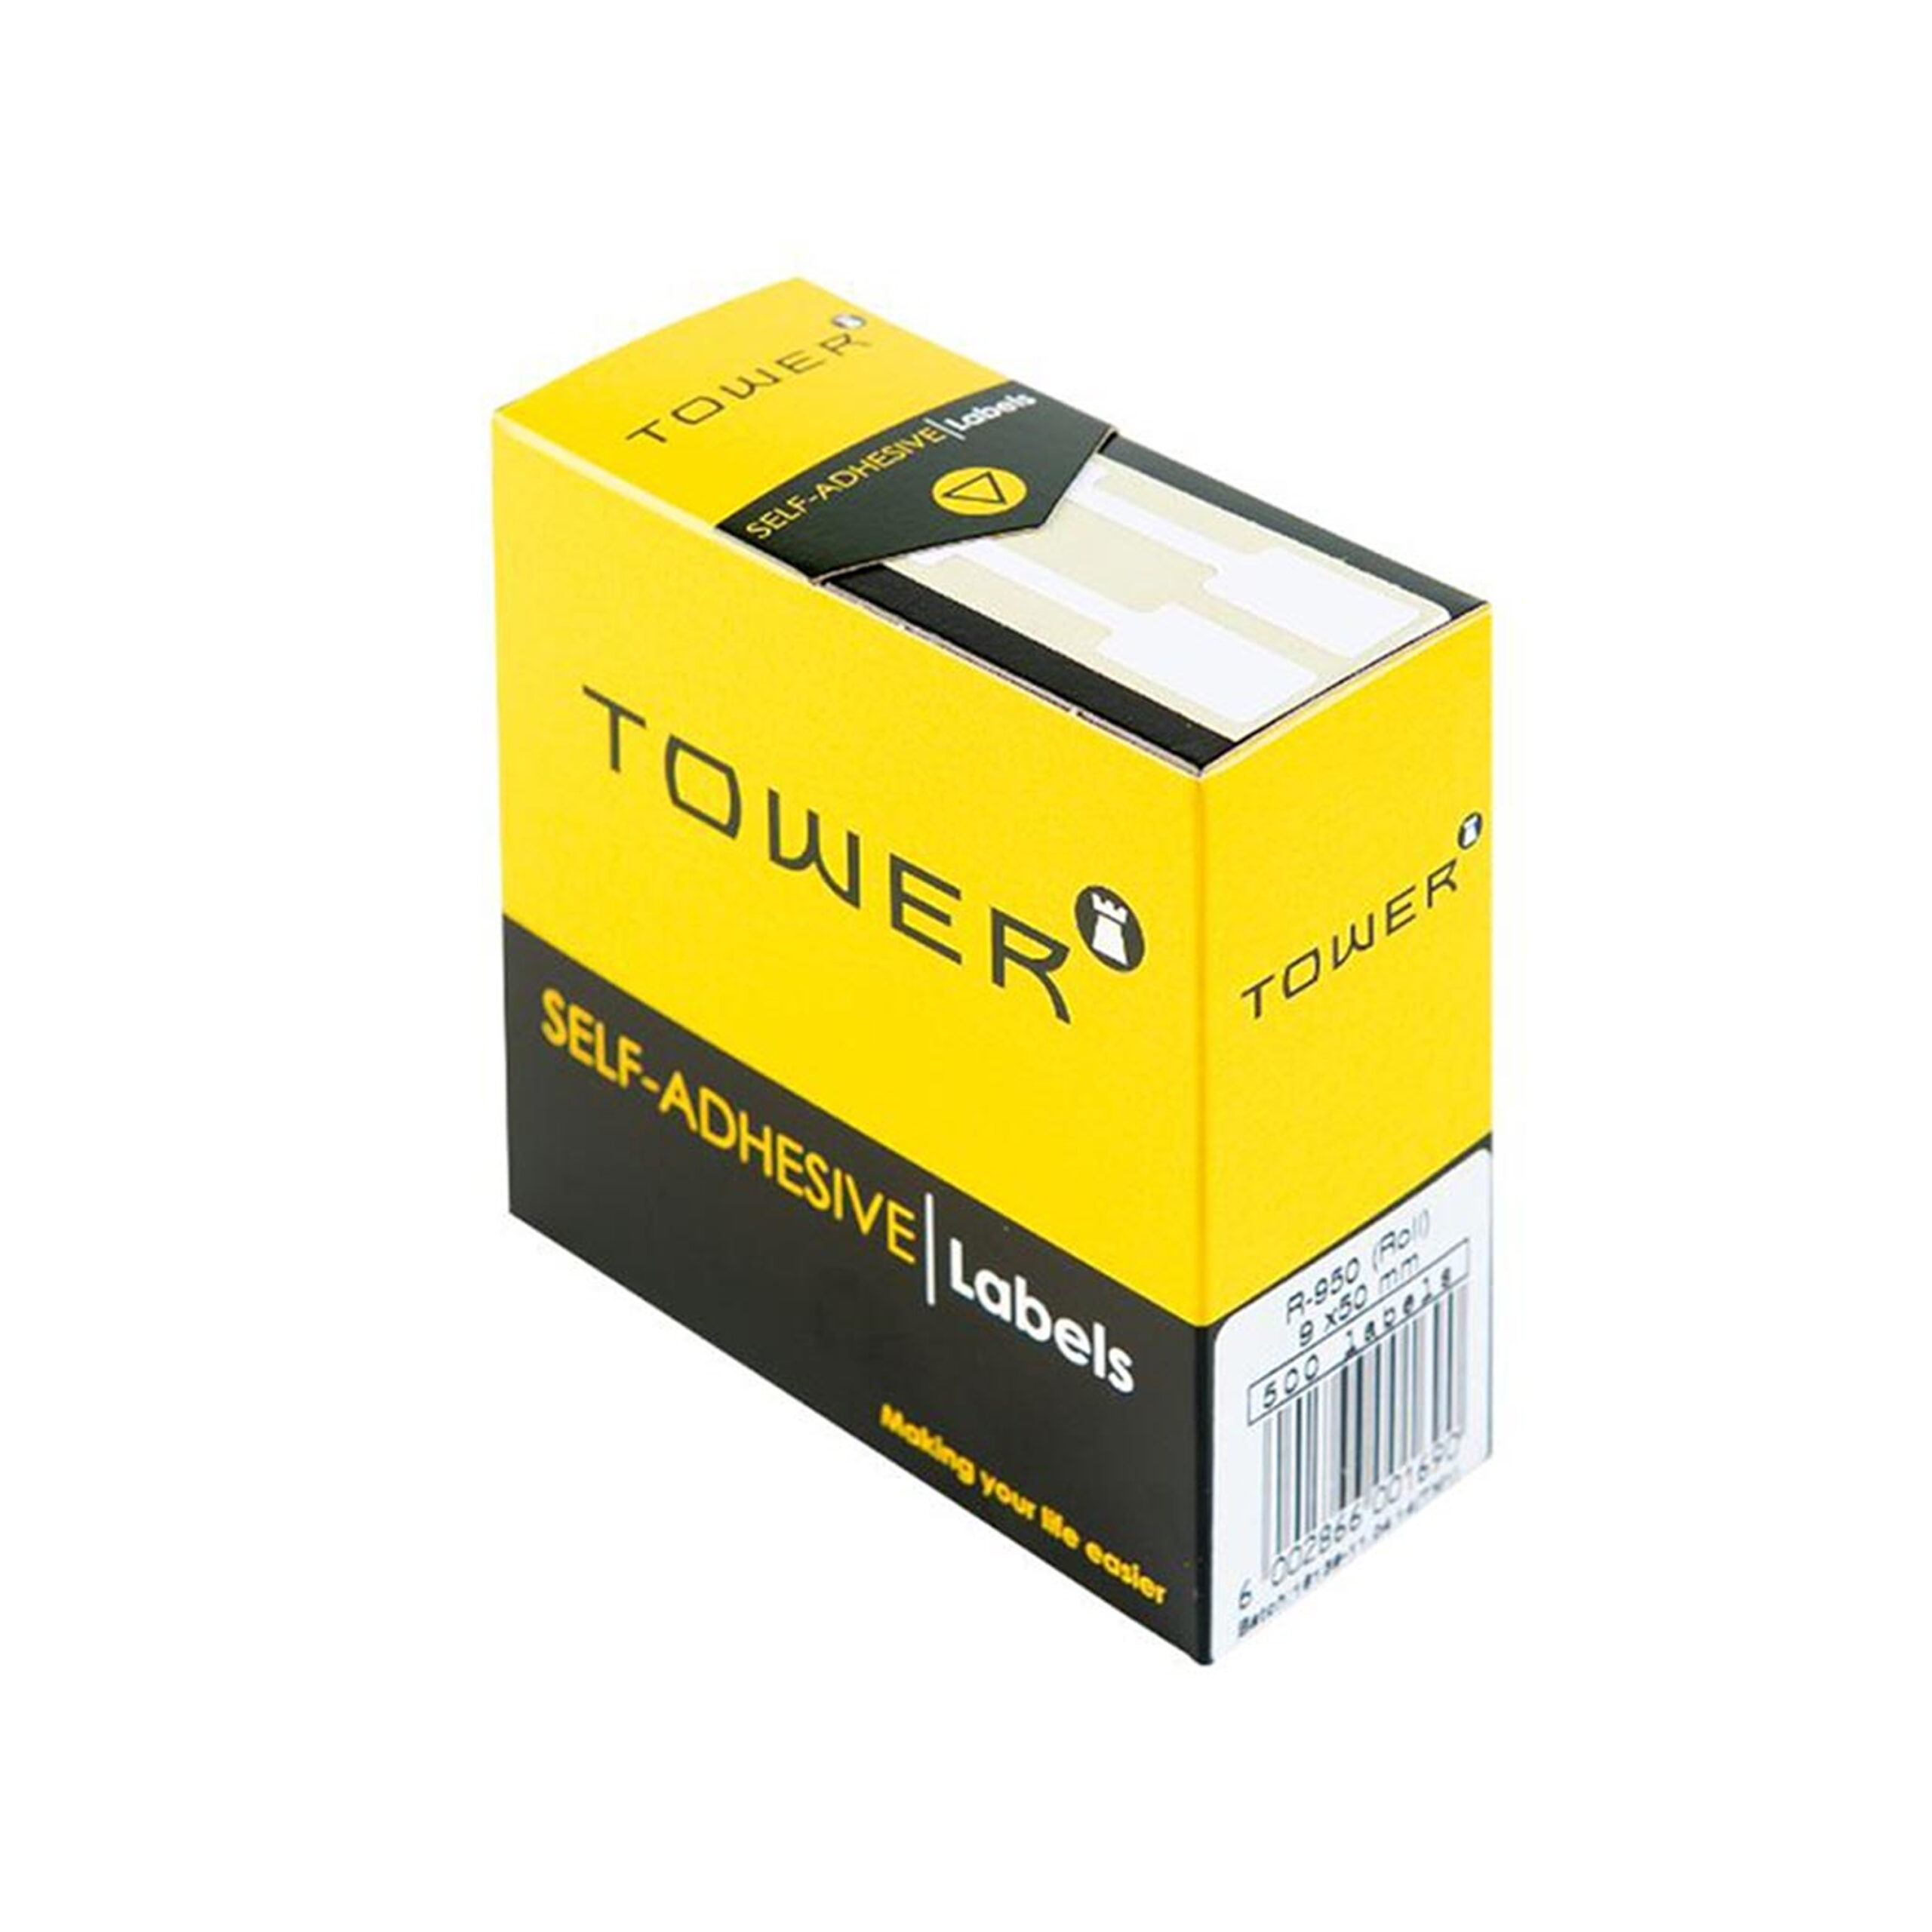 TOWER  SELF
ADHESIVE WHITE
LABELS  9x50mm 
(500 LABELS)